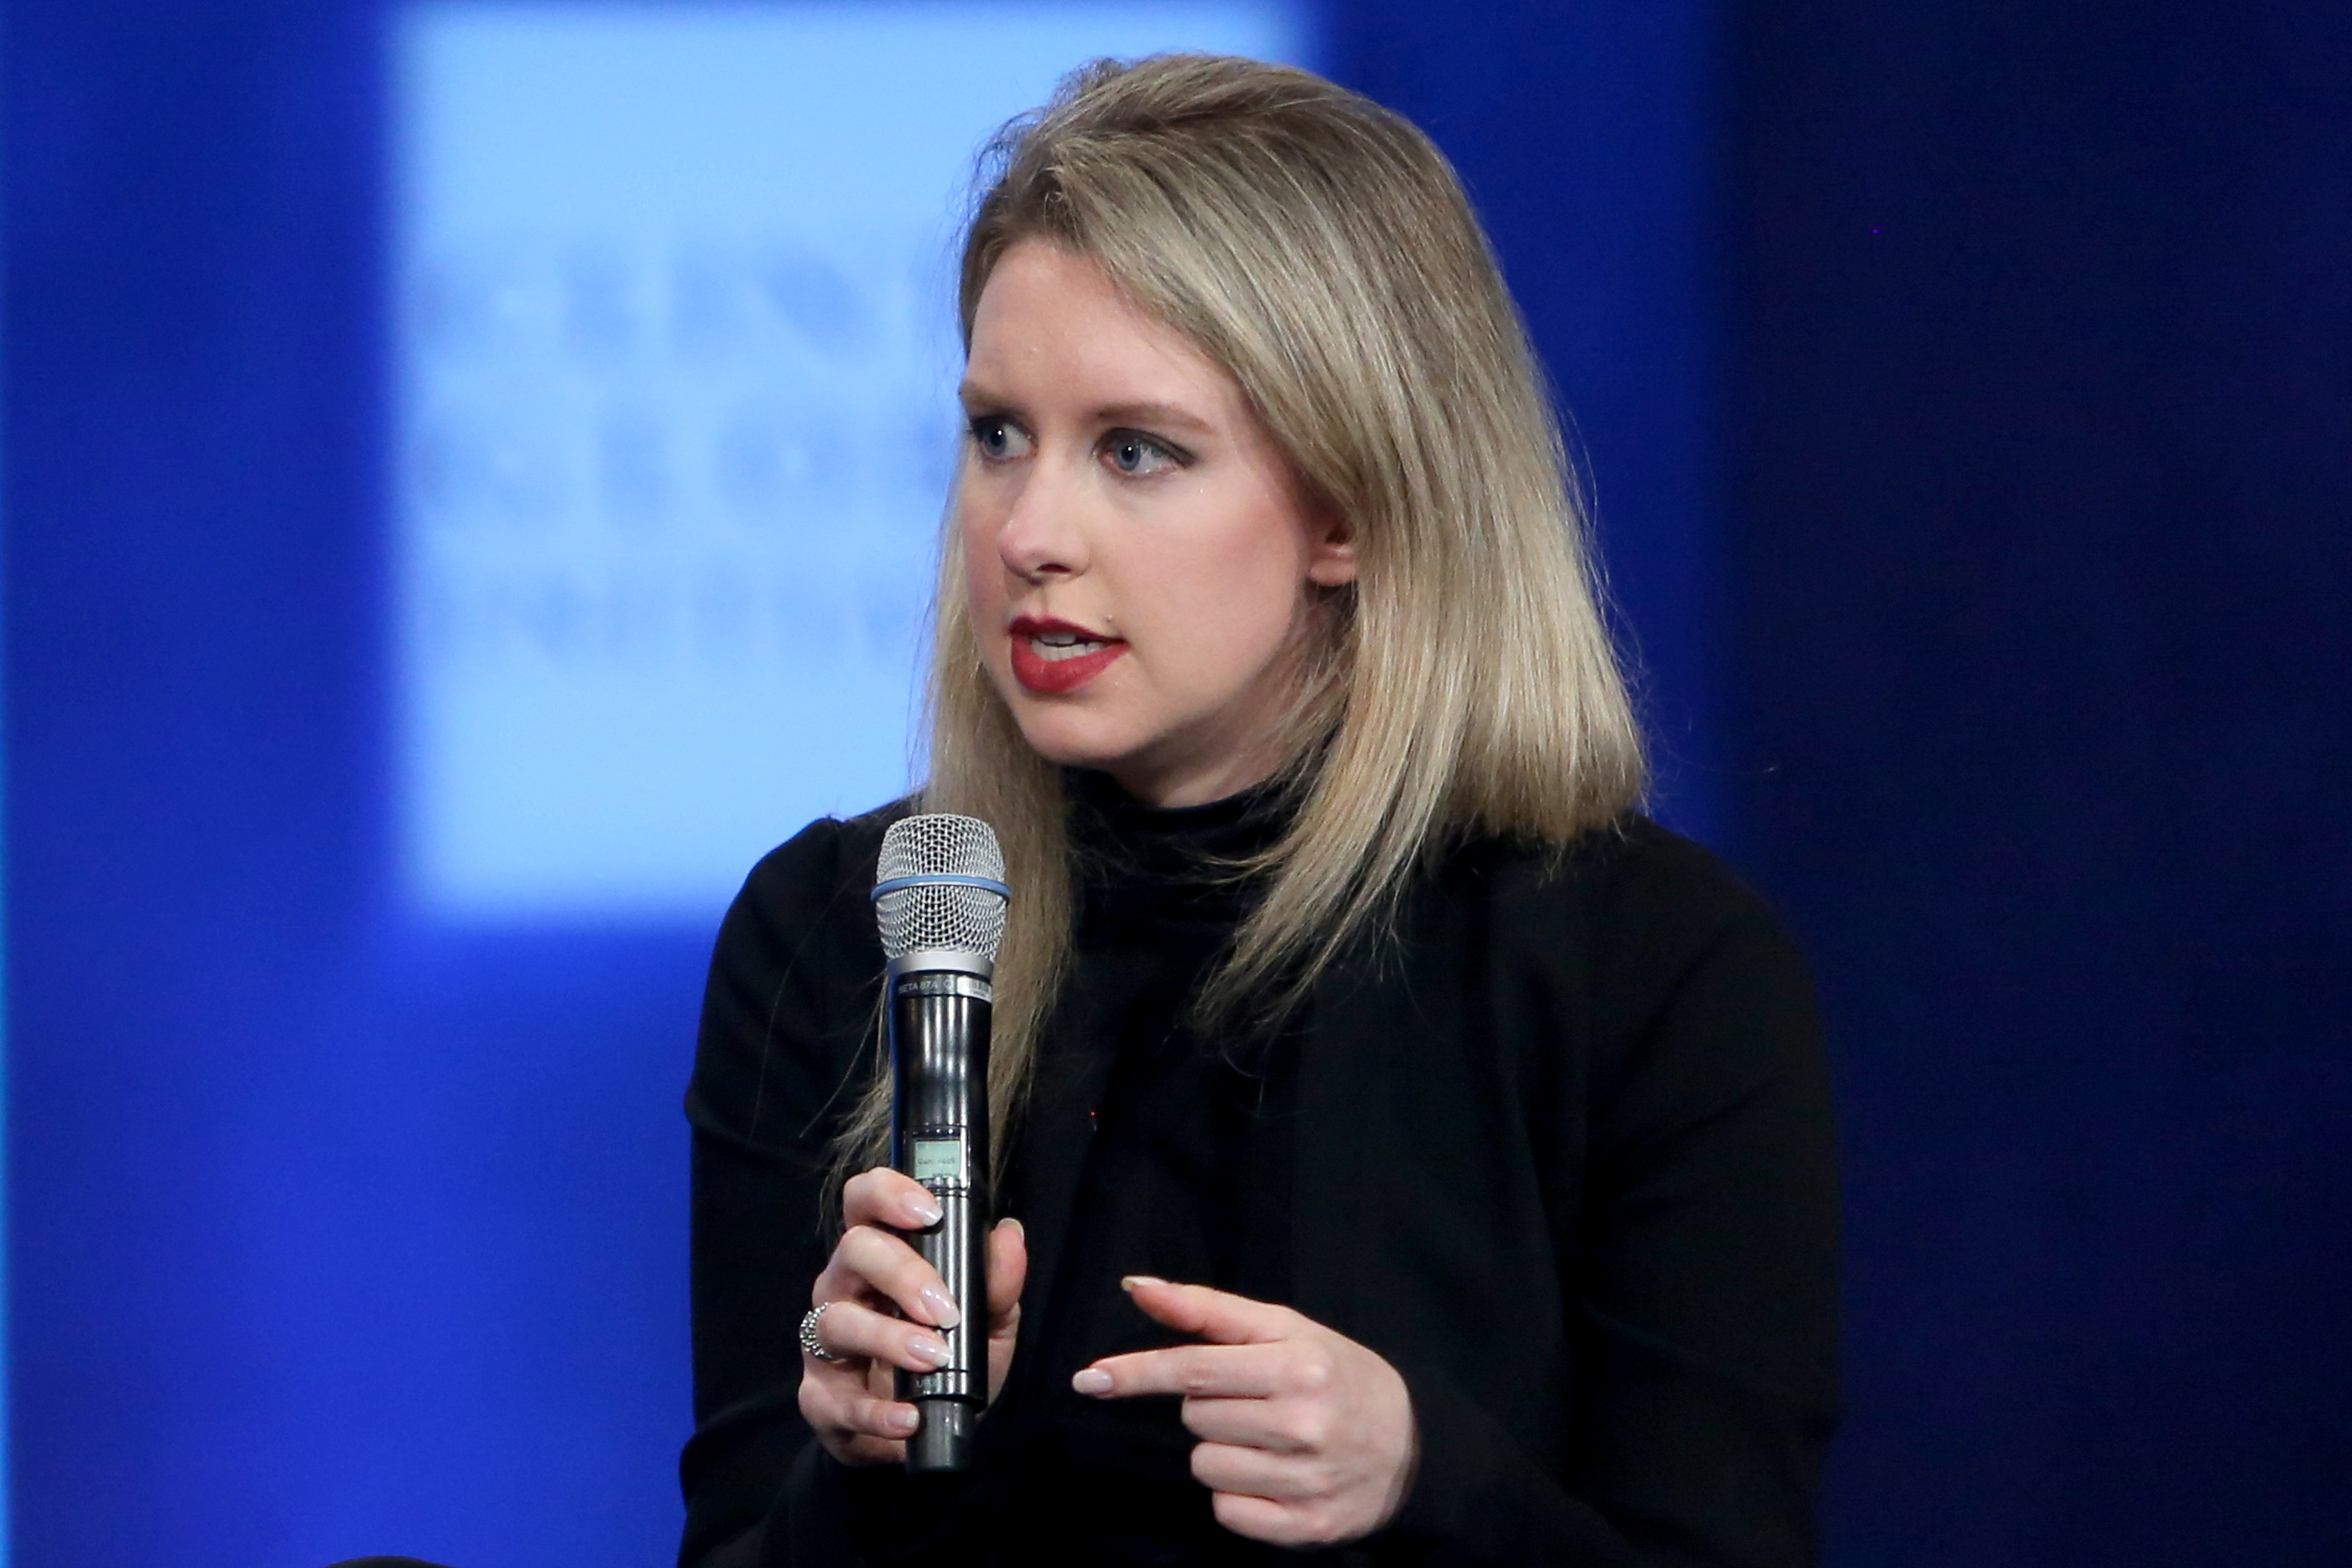 Elizabeth Holmes, founder and CEO of Theranos, speaks at the Clinton Global Initiative Annual Meeting in New York, Sept. 29, 2015 (CNBC—NBCU Photo Bank via Getty Images)